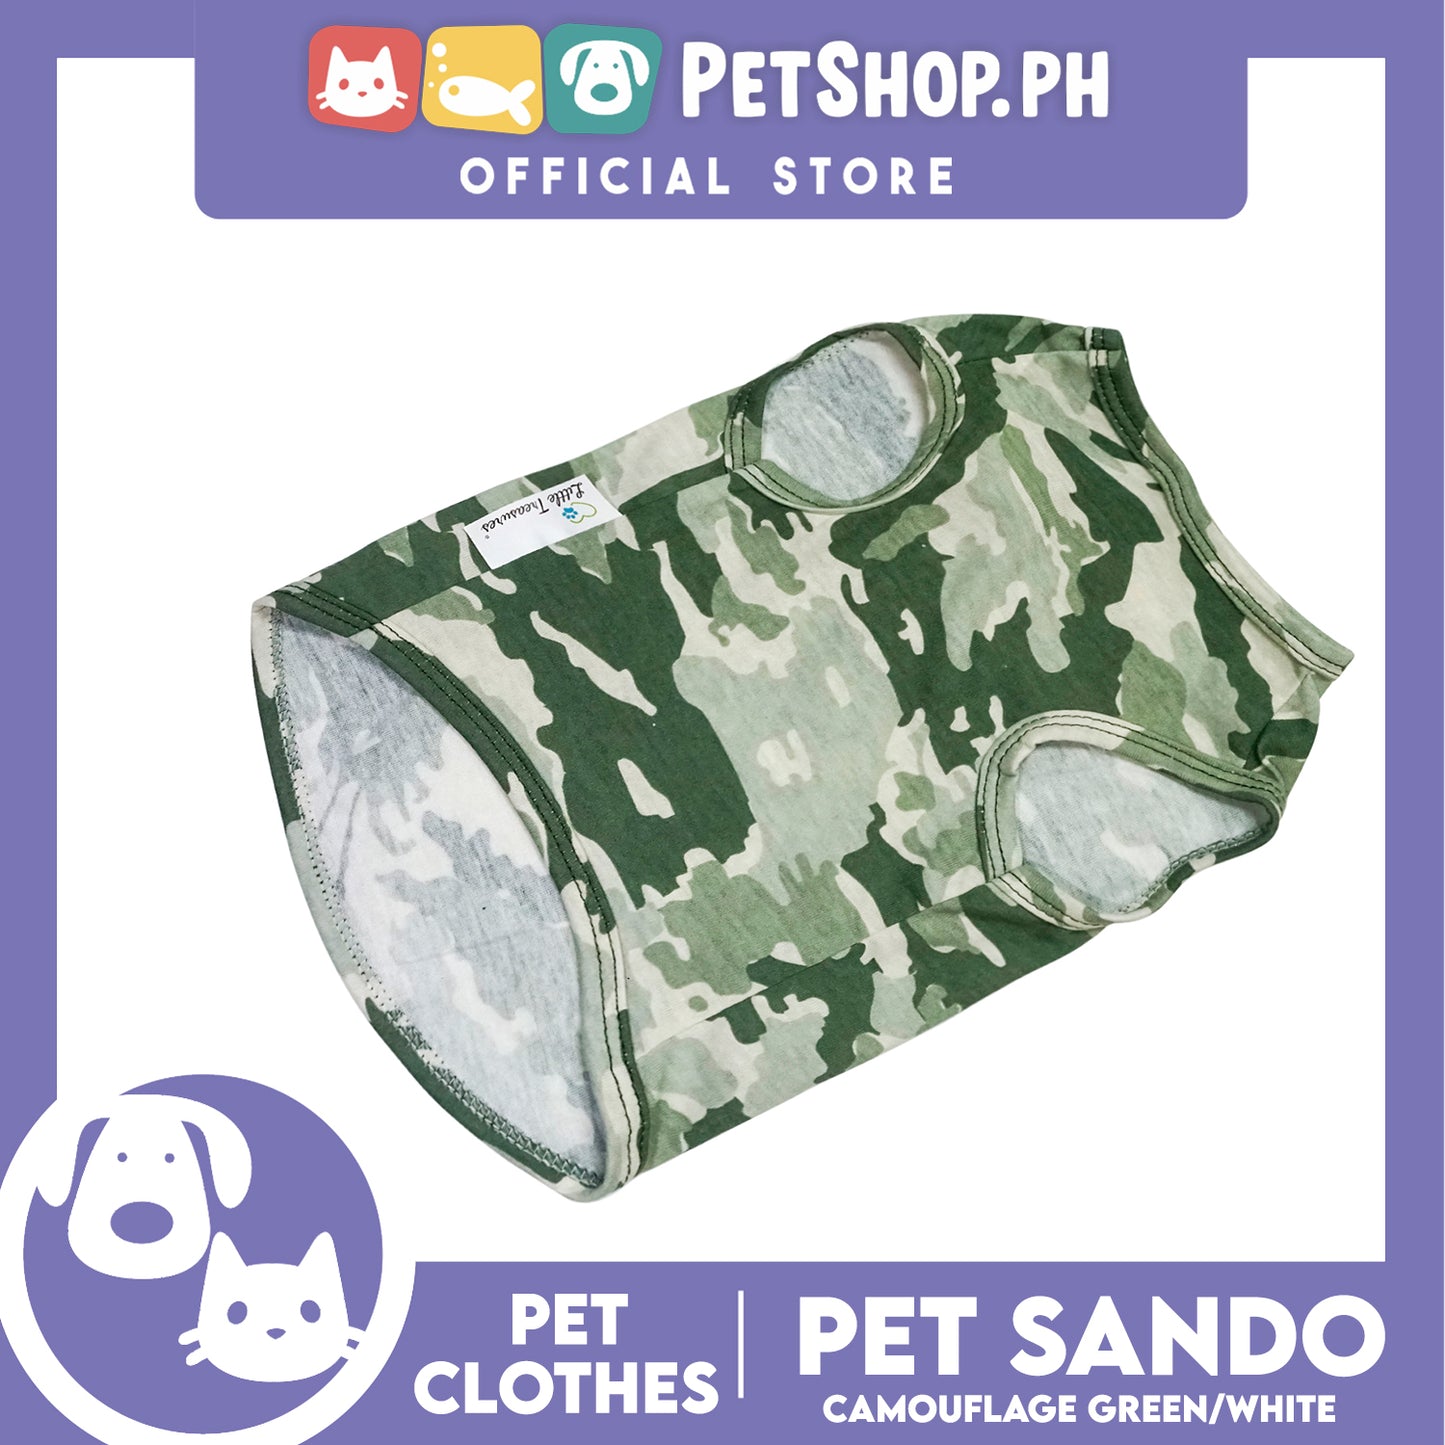 Pet Sando Camouflage Green/White (Small) Pet Shirt Clothes Perfect fit for Dogs